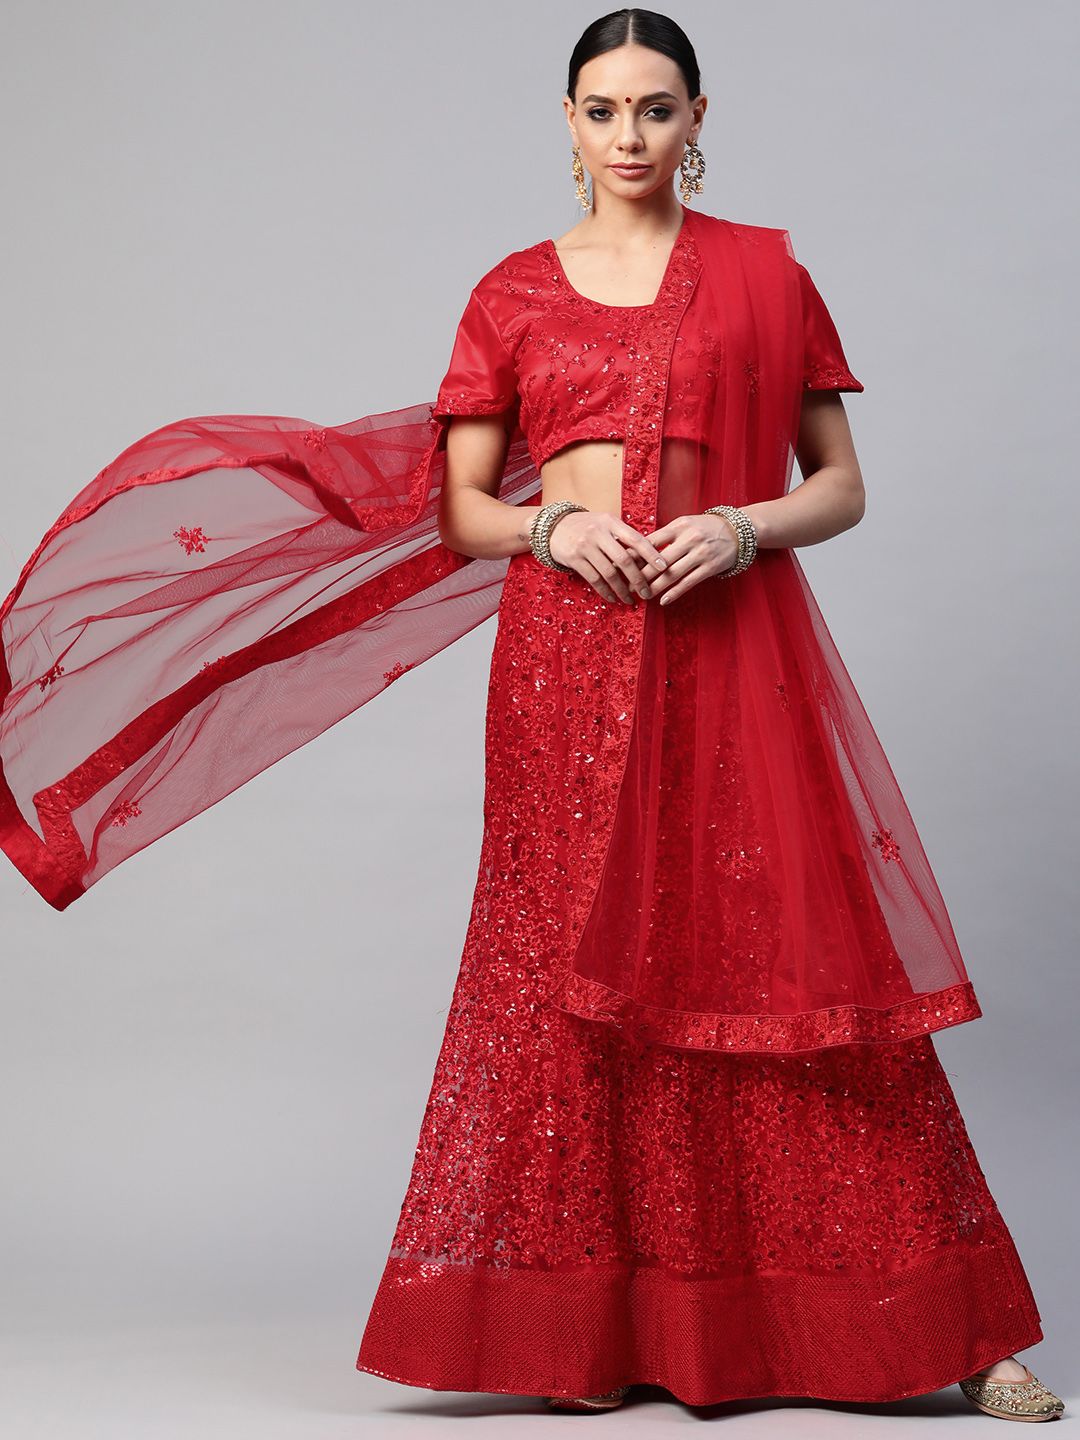 Readiprint Fashions Women Red Semi-Stitched Lehenga & Unstitched Blouse With Dupatta Price in India